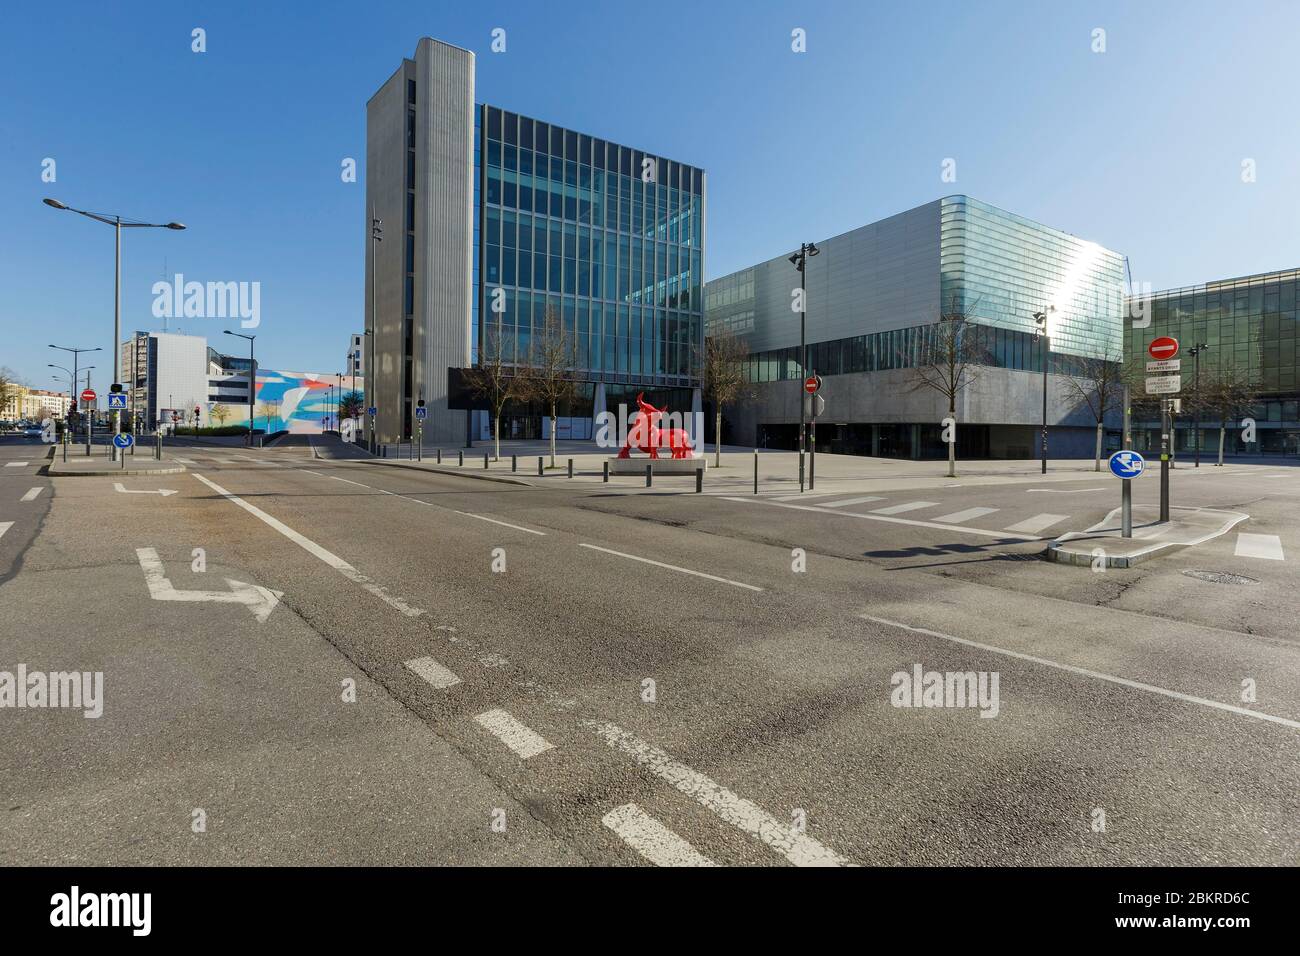 France, Meurthe et Moselle, Nancy, Covid 19 or Coronavirus lockdown, Nancy Gare area, sculpture called Le Taureau (The Bull) by Ge Pellini in front of the Centre des Congres Jean Prouve as part of the ADN (Art Dans Nancy) project Stock Photo